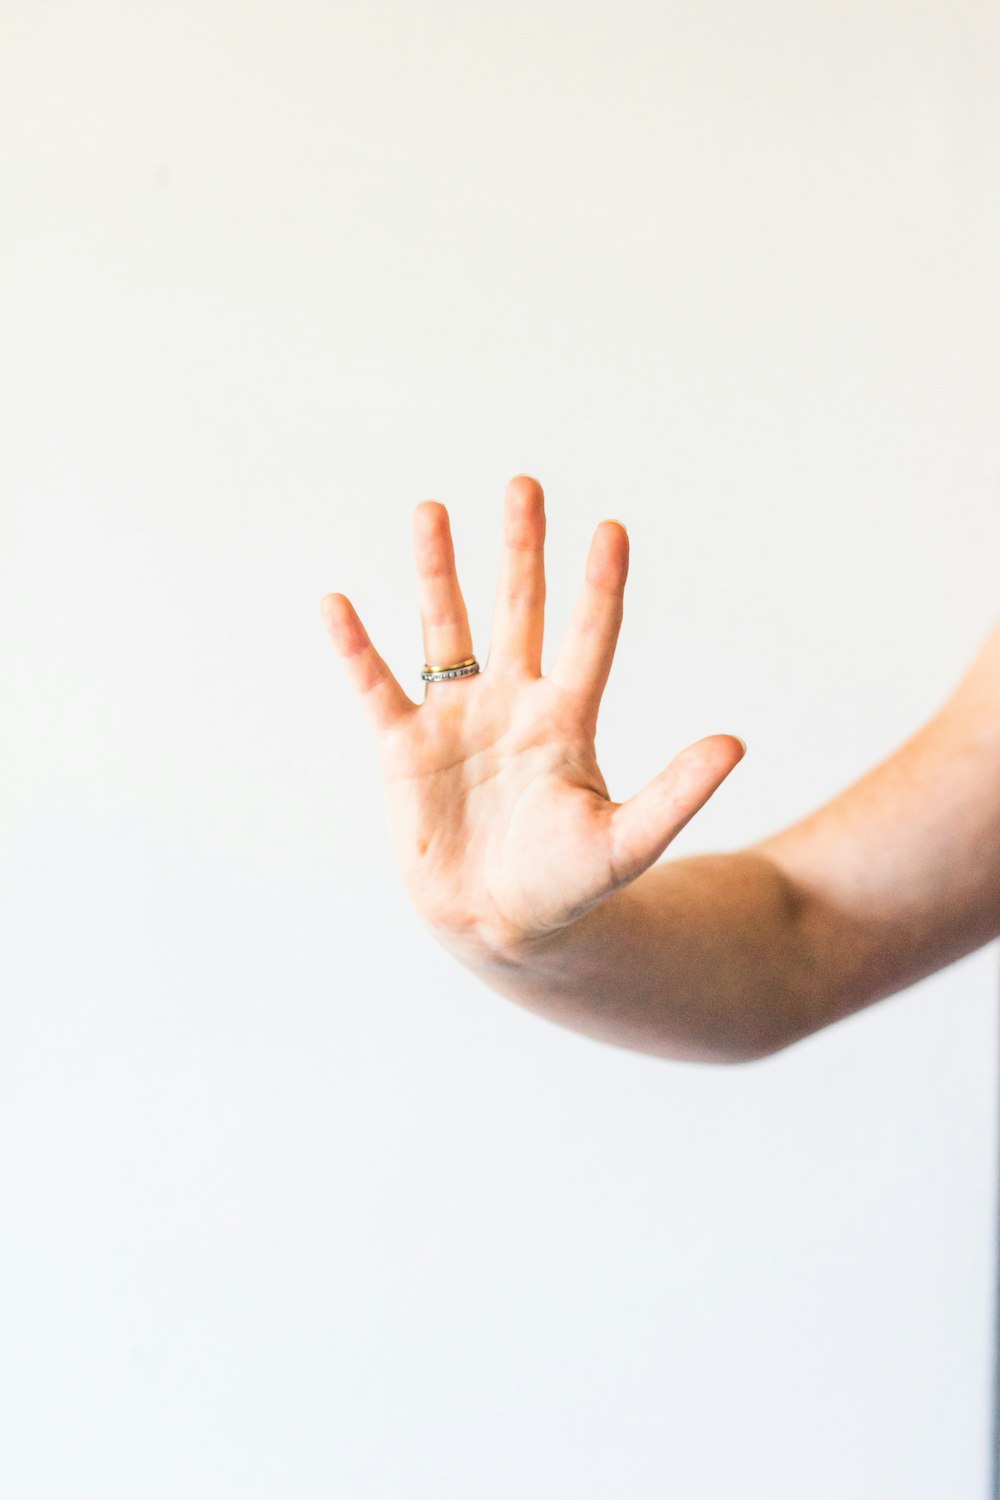 30k+ Hand Reaching Out Pictures  Download Free Images on Unsplash